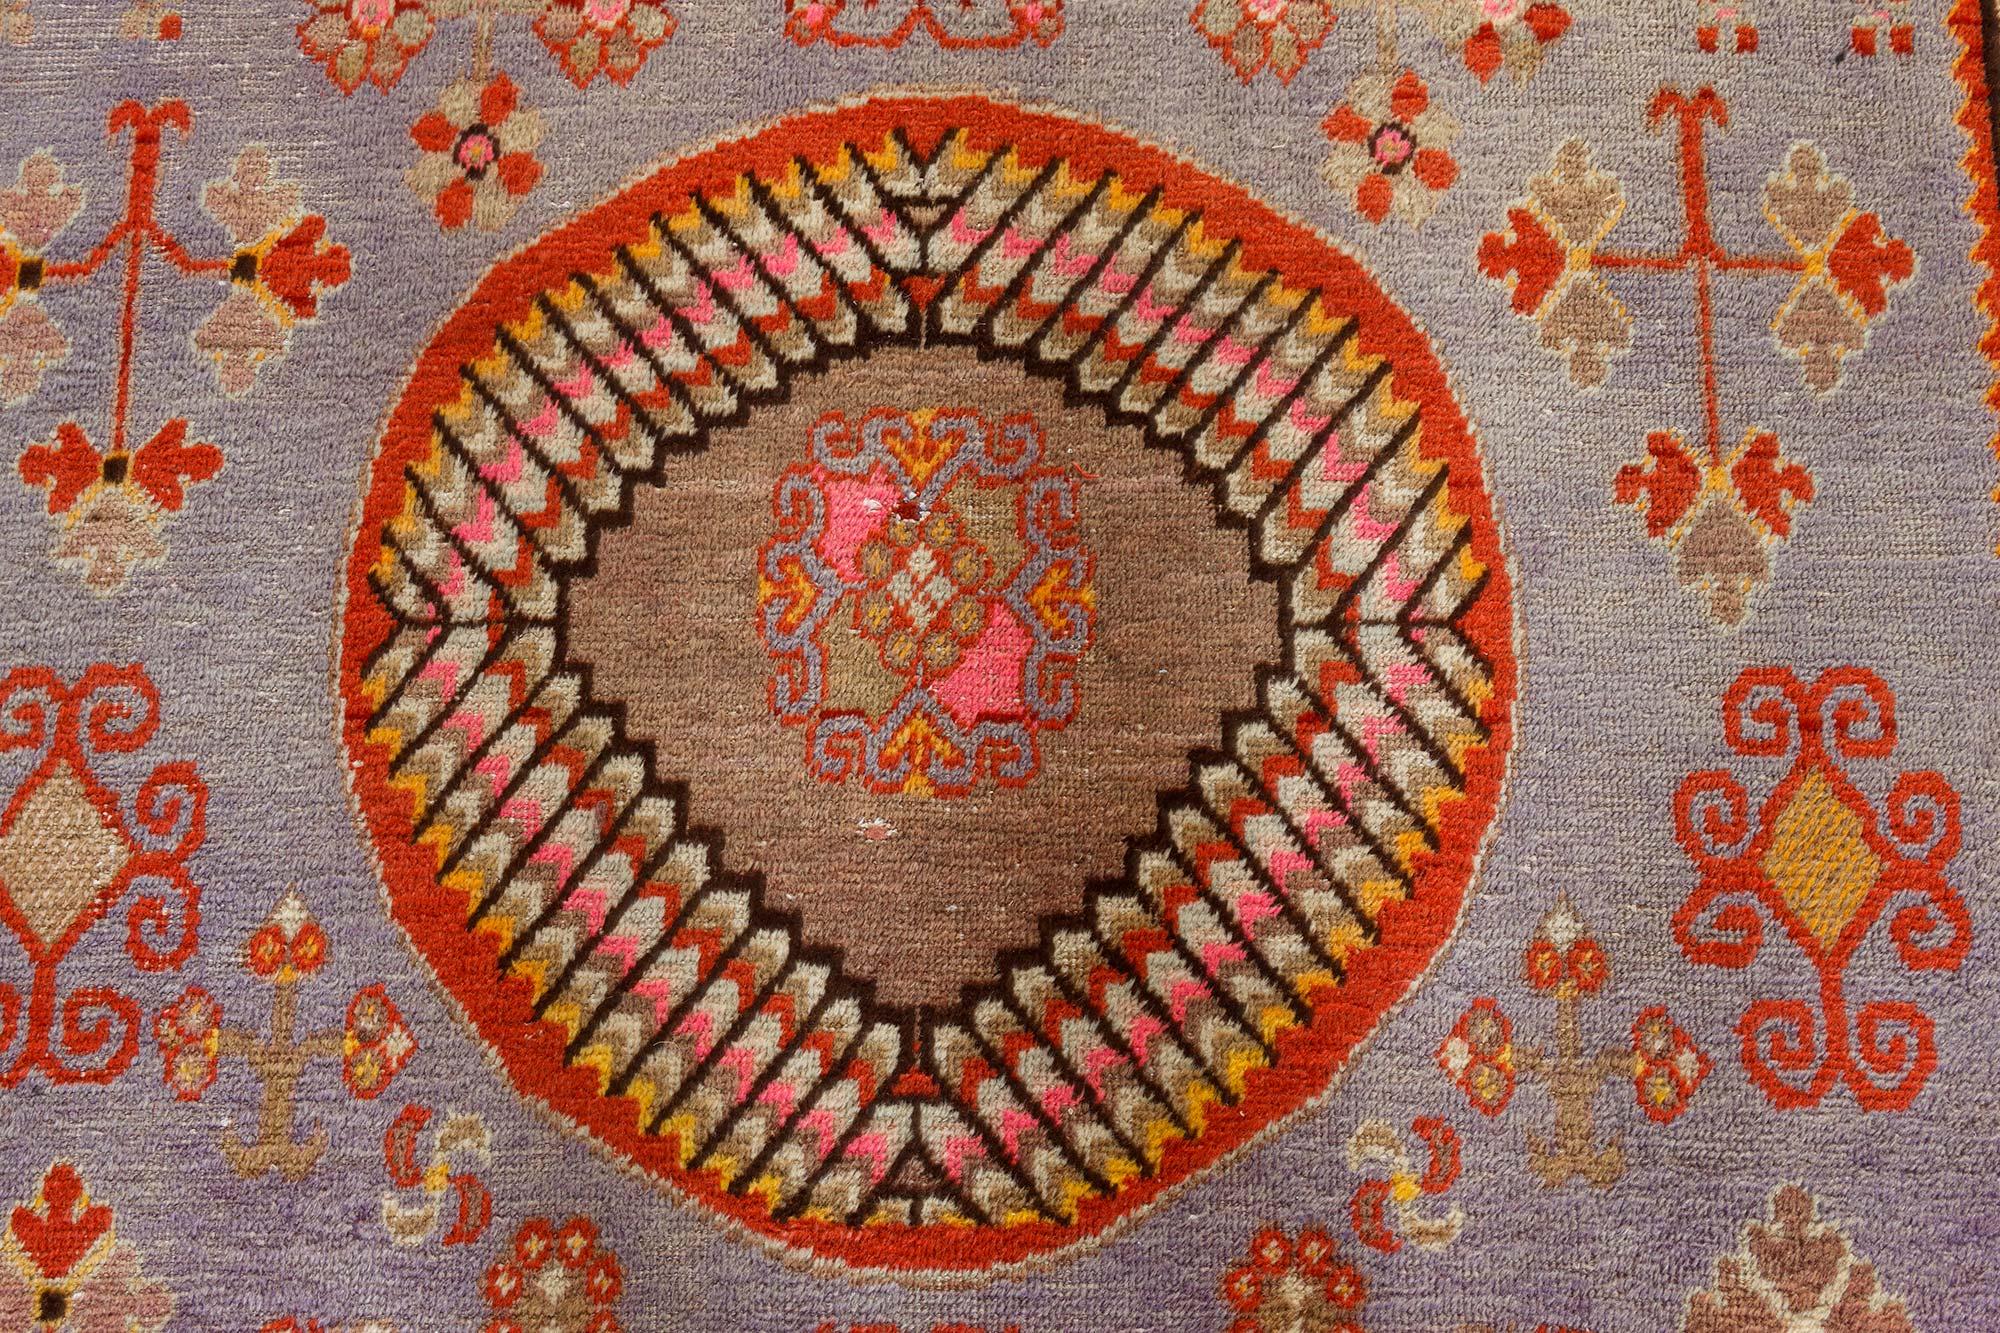 Mid-20th century Samarkand brown, gold, orange, pink, purple, and red wool rug.
Size: 6'5